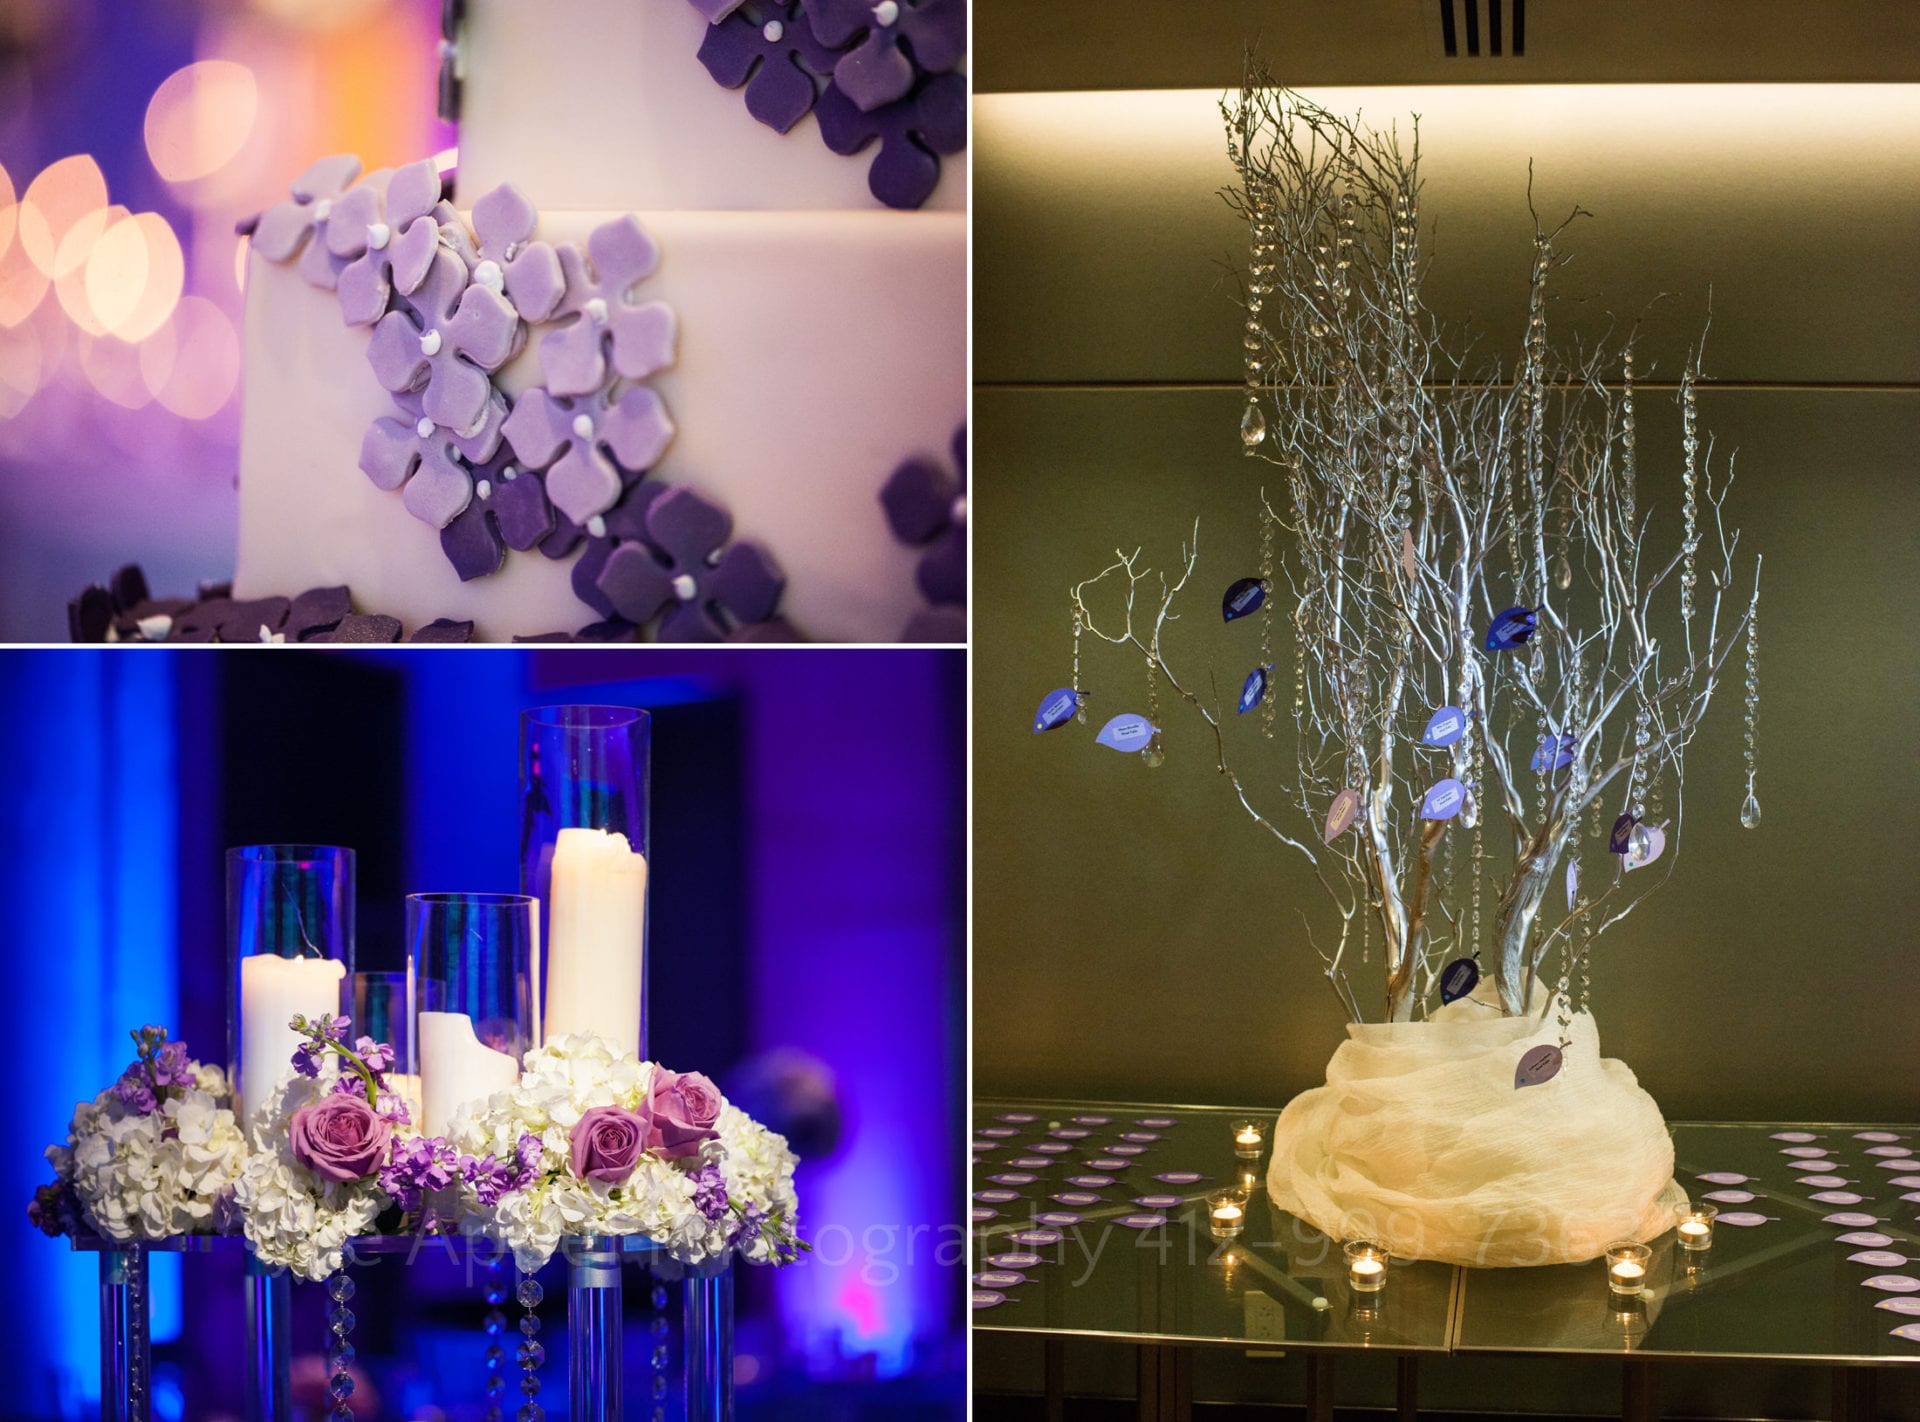 Fairmont Hotel Pittsburgh Weddings detail photos of a cake with purple fondant flowers, a candles in the midst of purple and white flowers, silver tree branches with tags hanging from them.